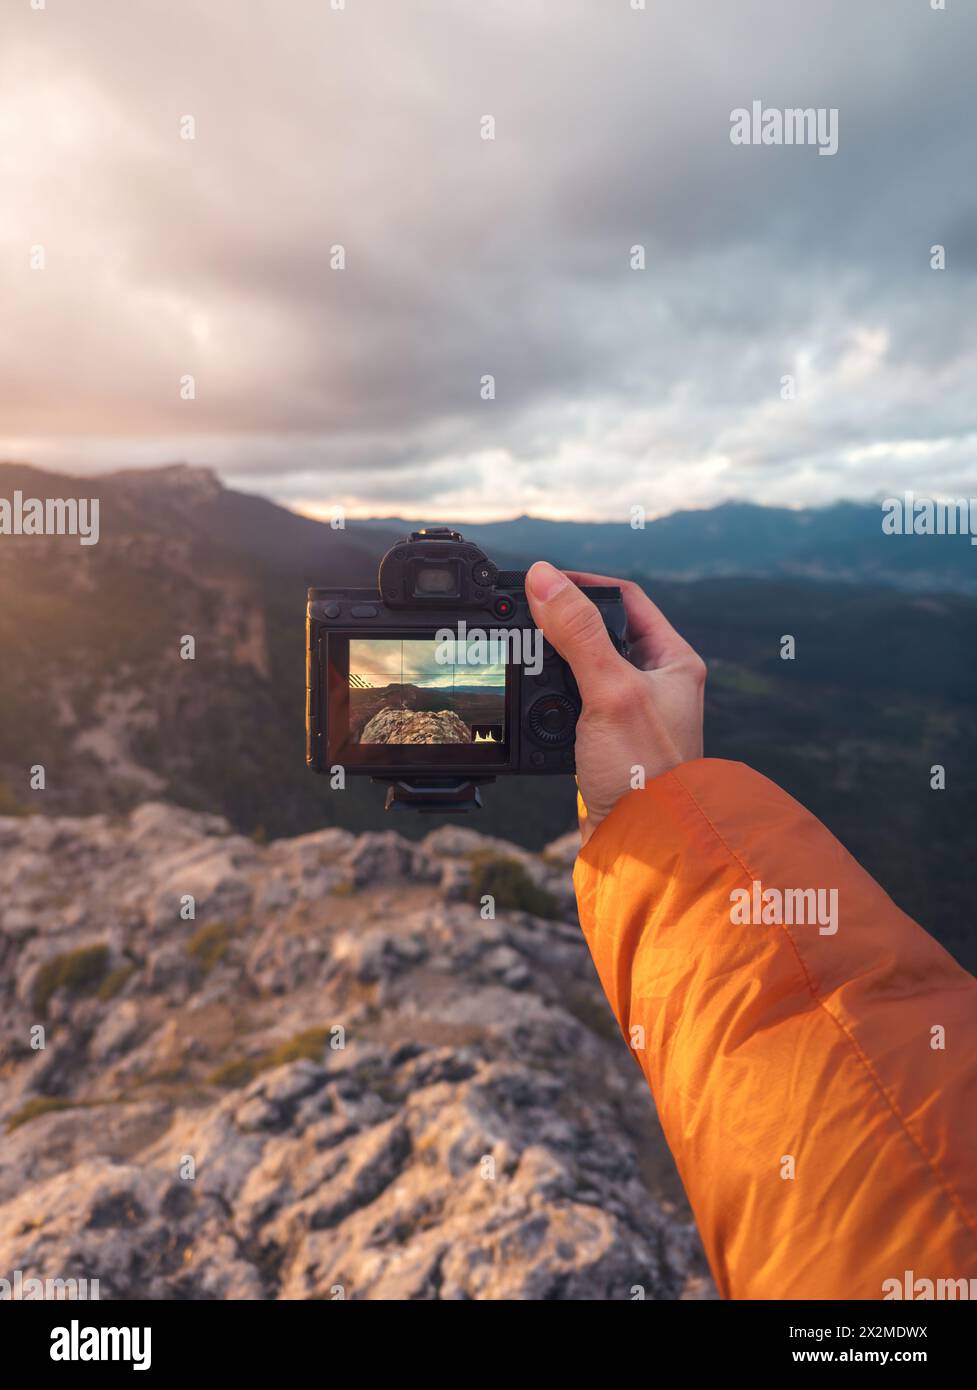 A person's hand holding a camera that captures a stunning mountainous landscape, symbolizing the fusion of technology and nature at the breathtaking o Stock Photo